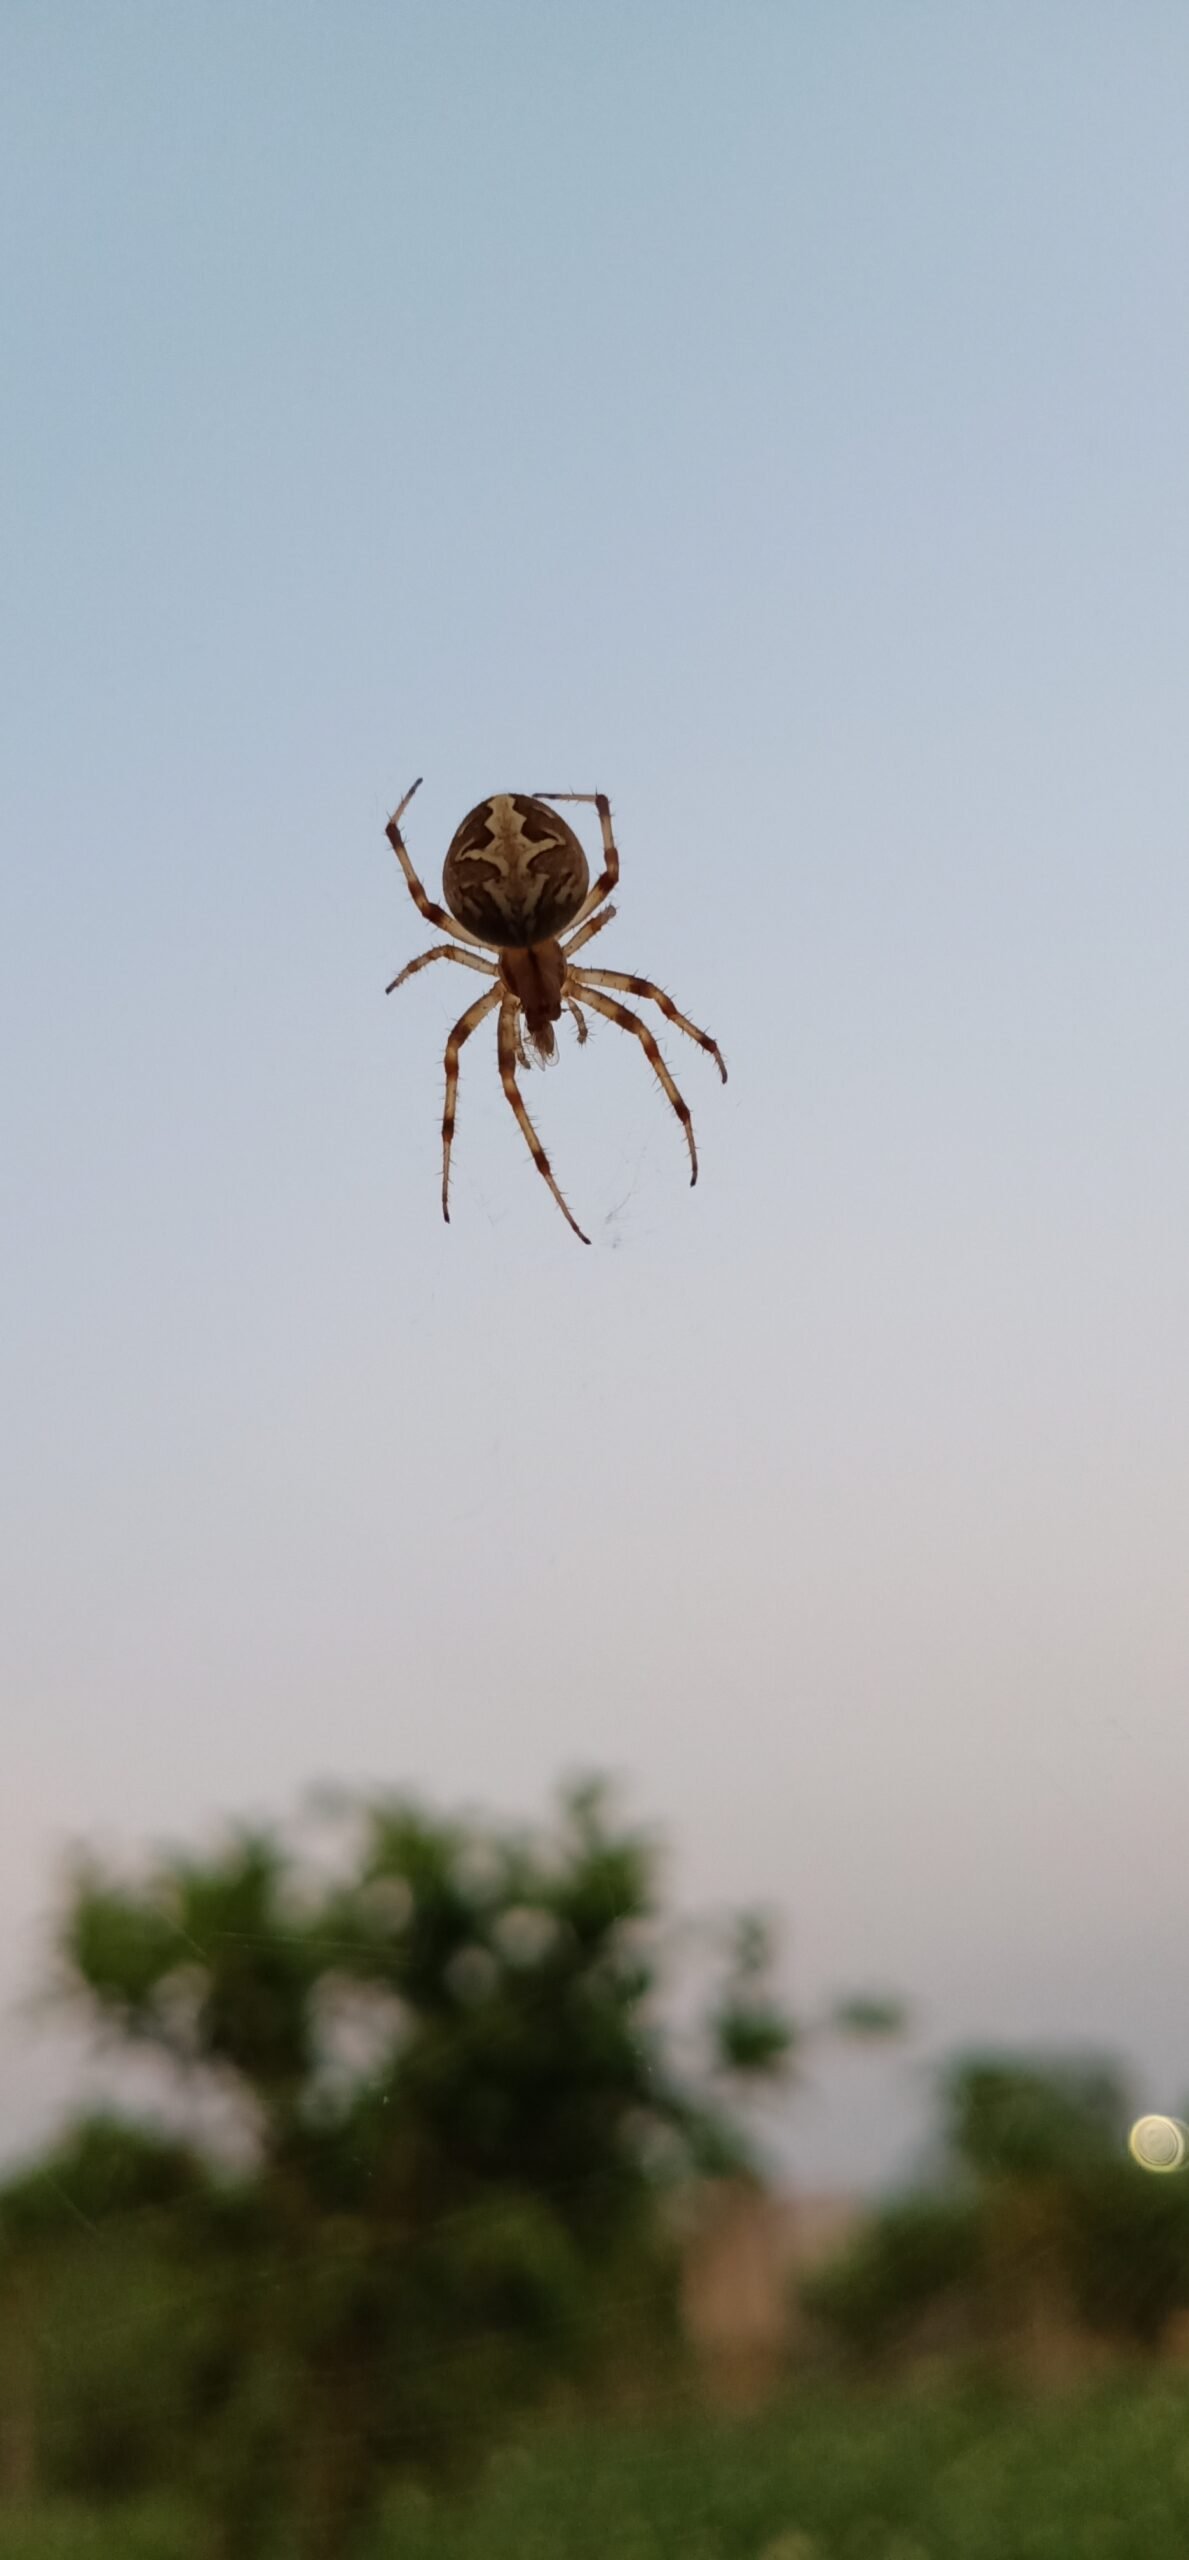 How Do You Replicate The Habitat Of The Australian Net-casting Spider In A Captive Environment?